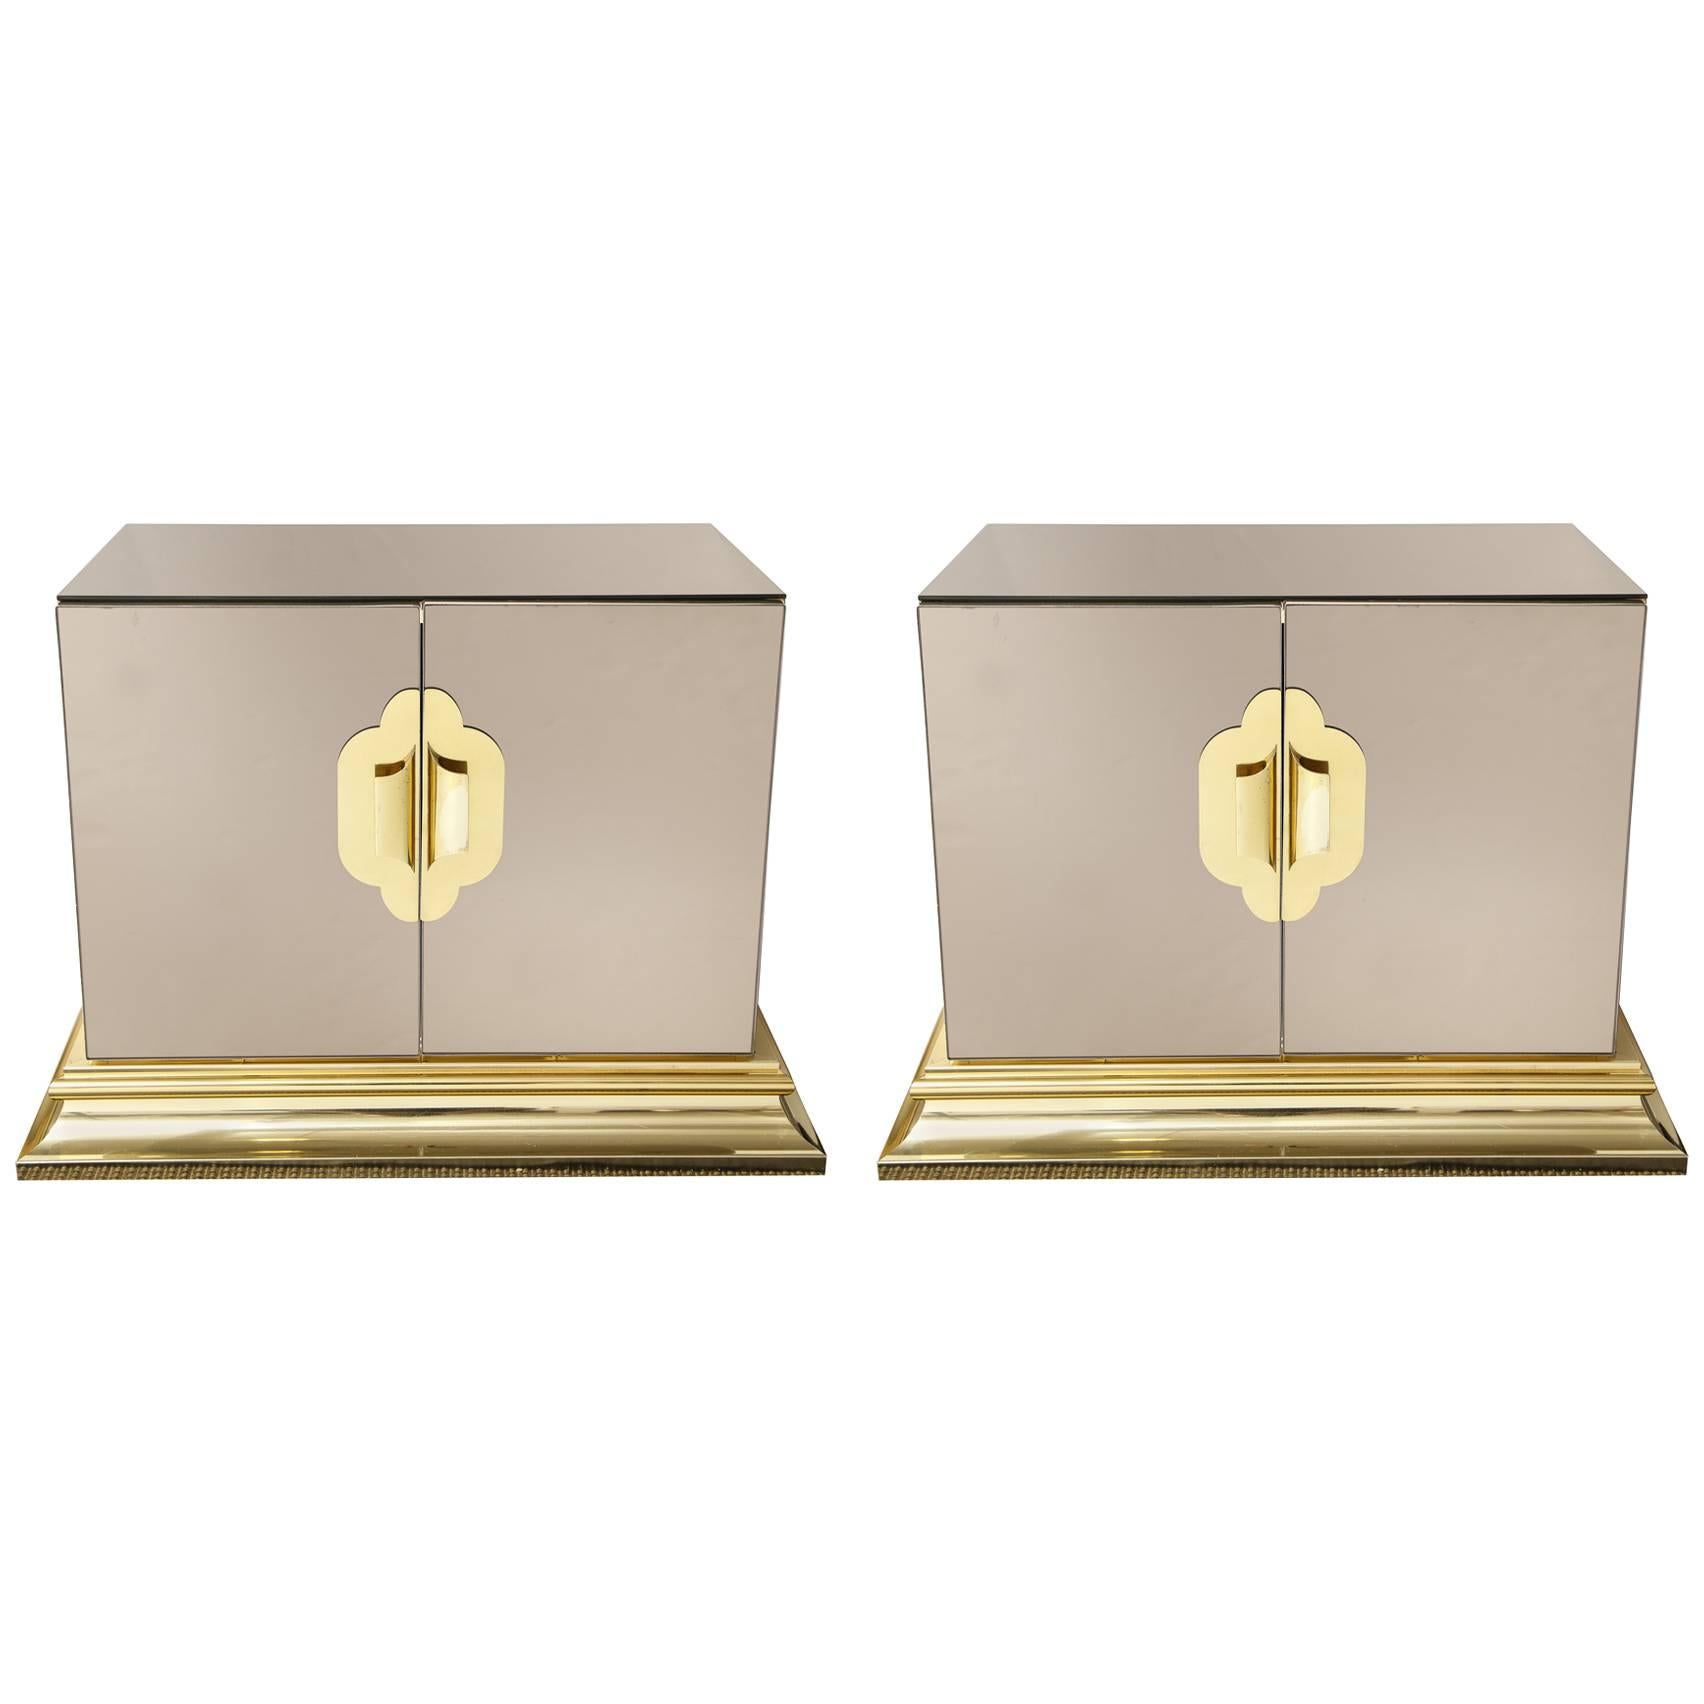 Pair of Mirrored Chests with Brass Handles and Details